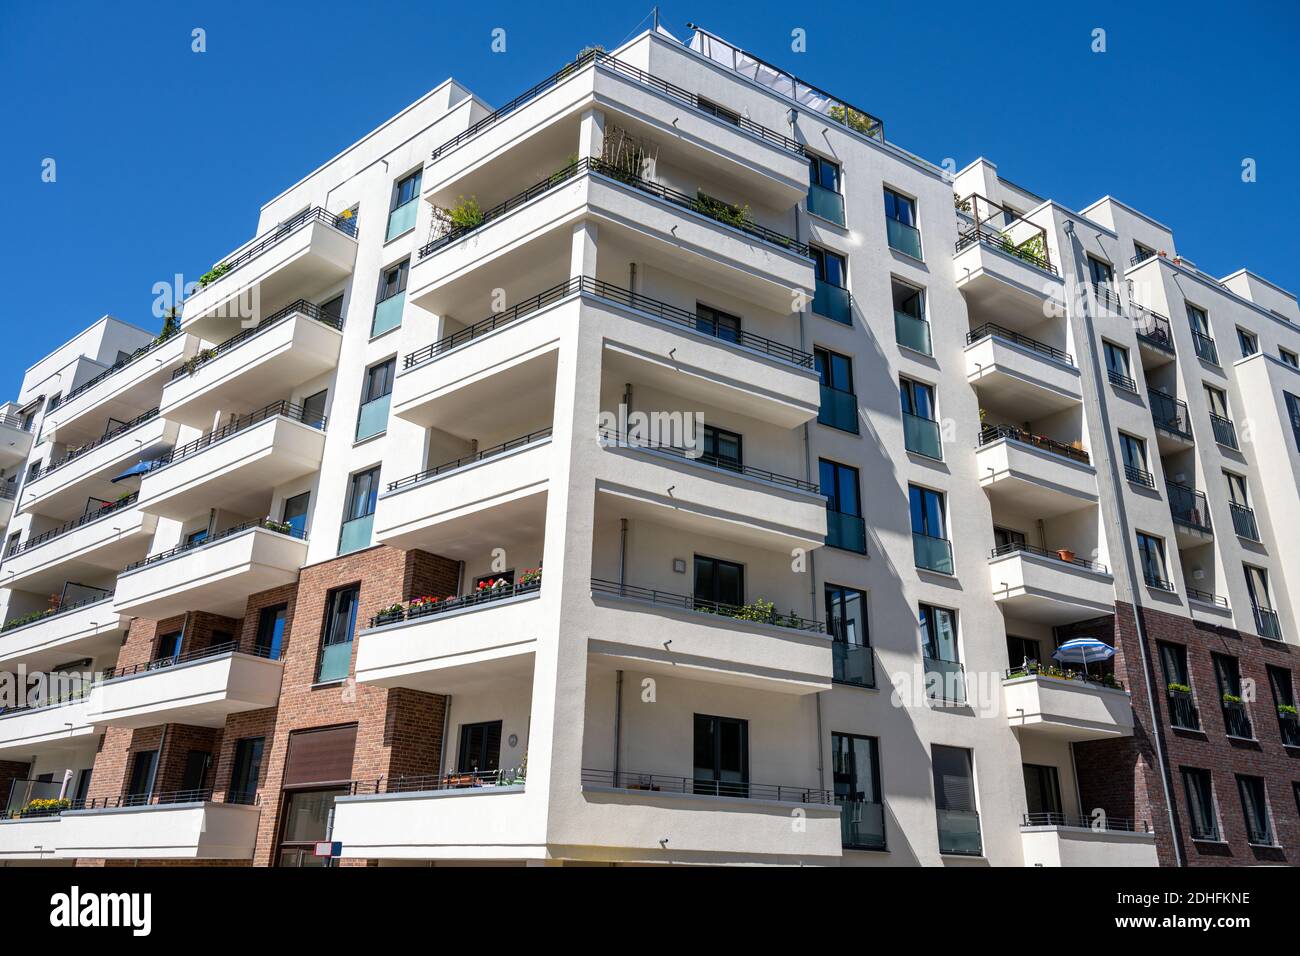 Modern apartment buildings with big balconies seen in Berlin, Germany Stock Photo